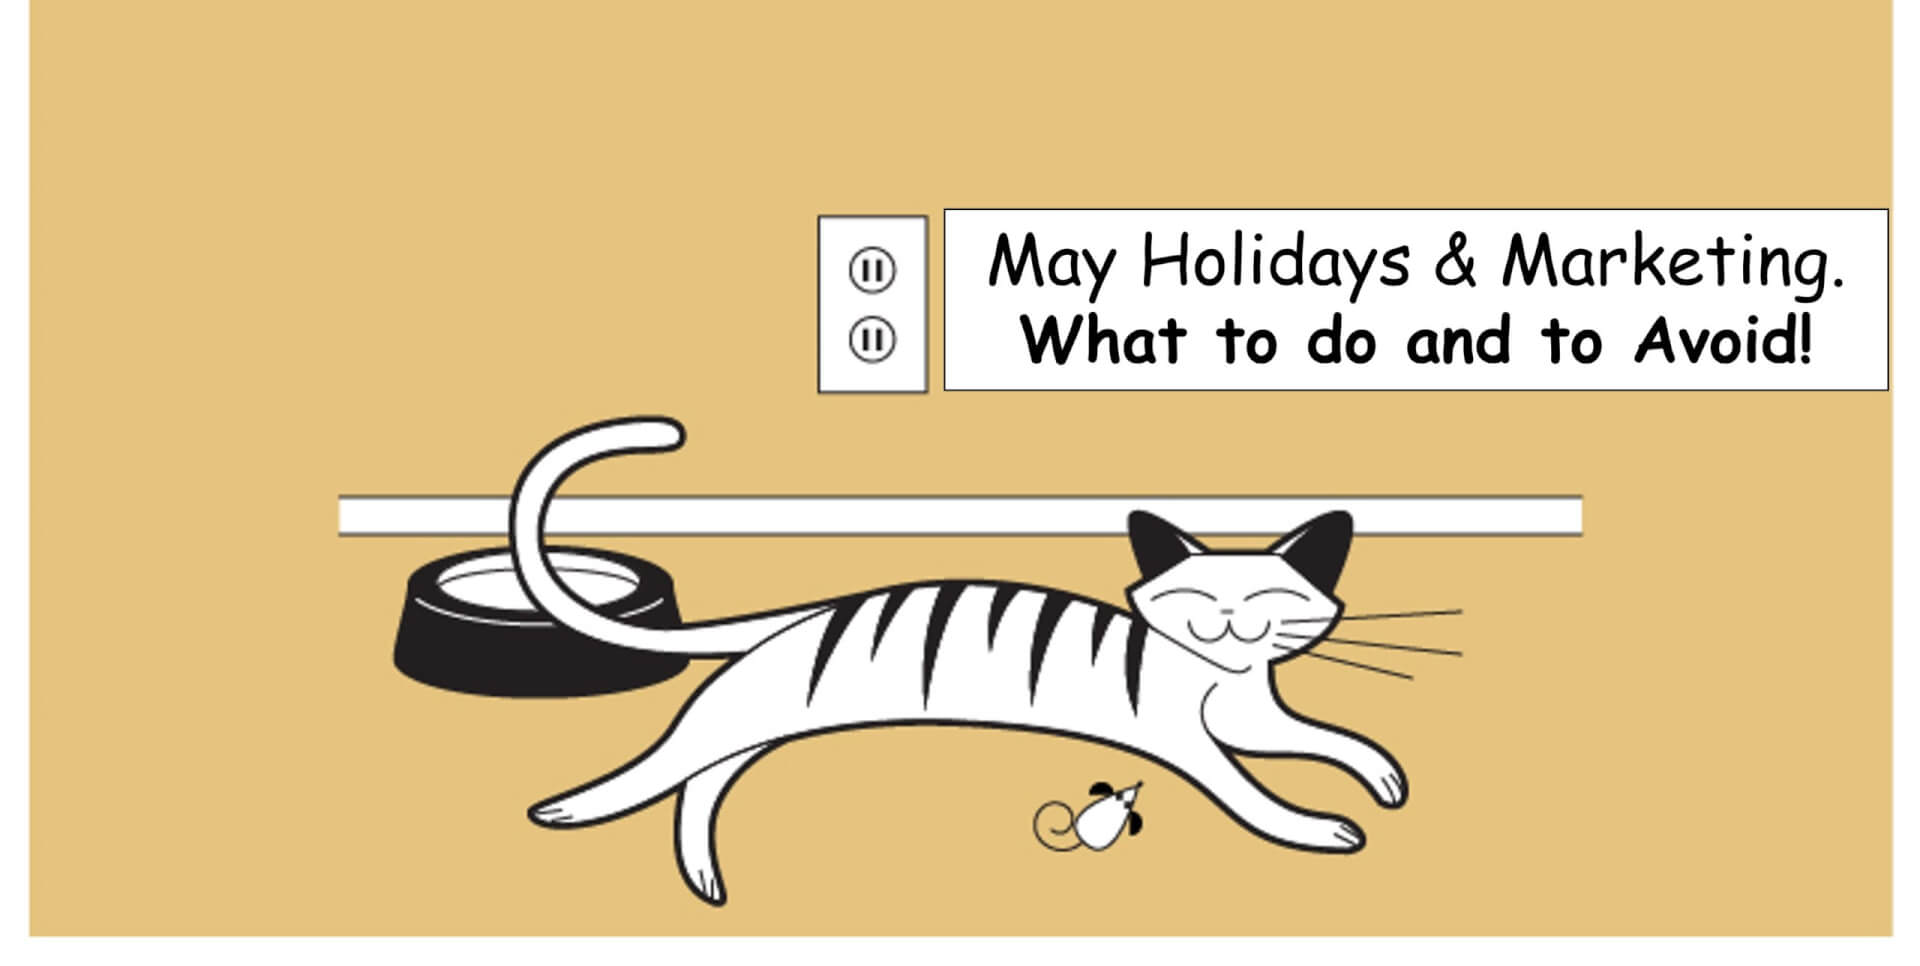 may holidays and how to market during them